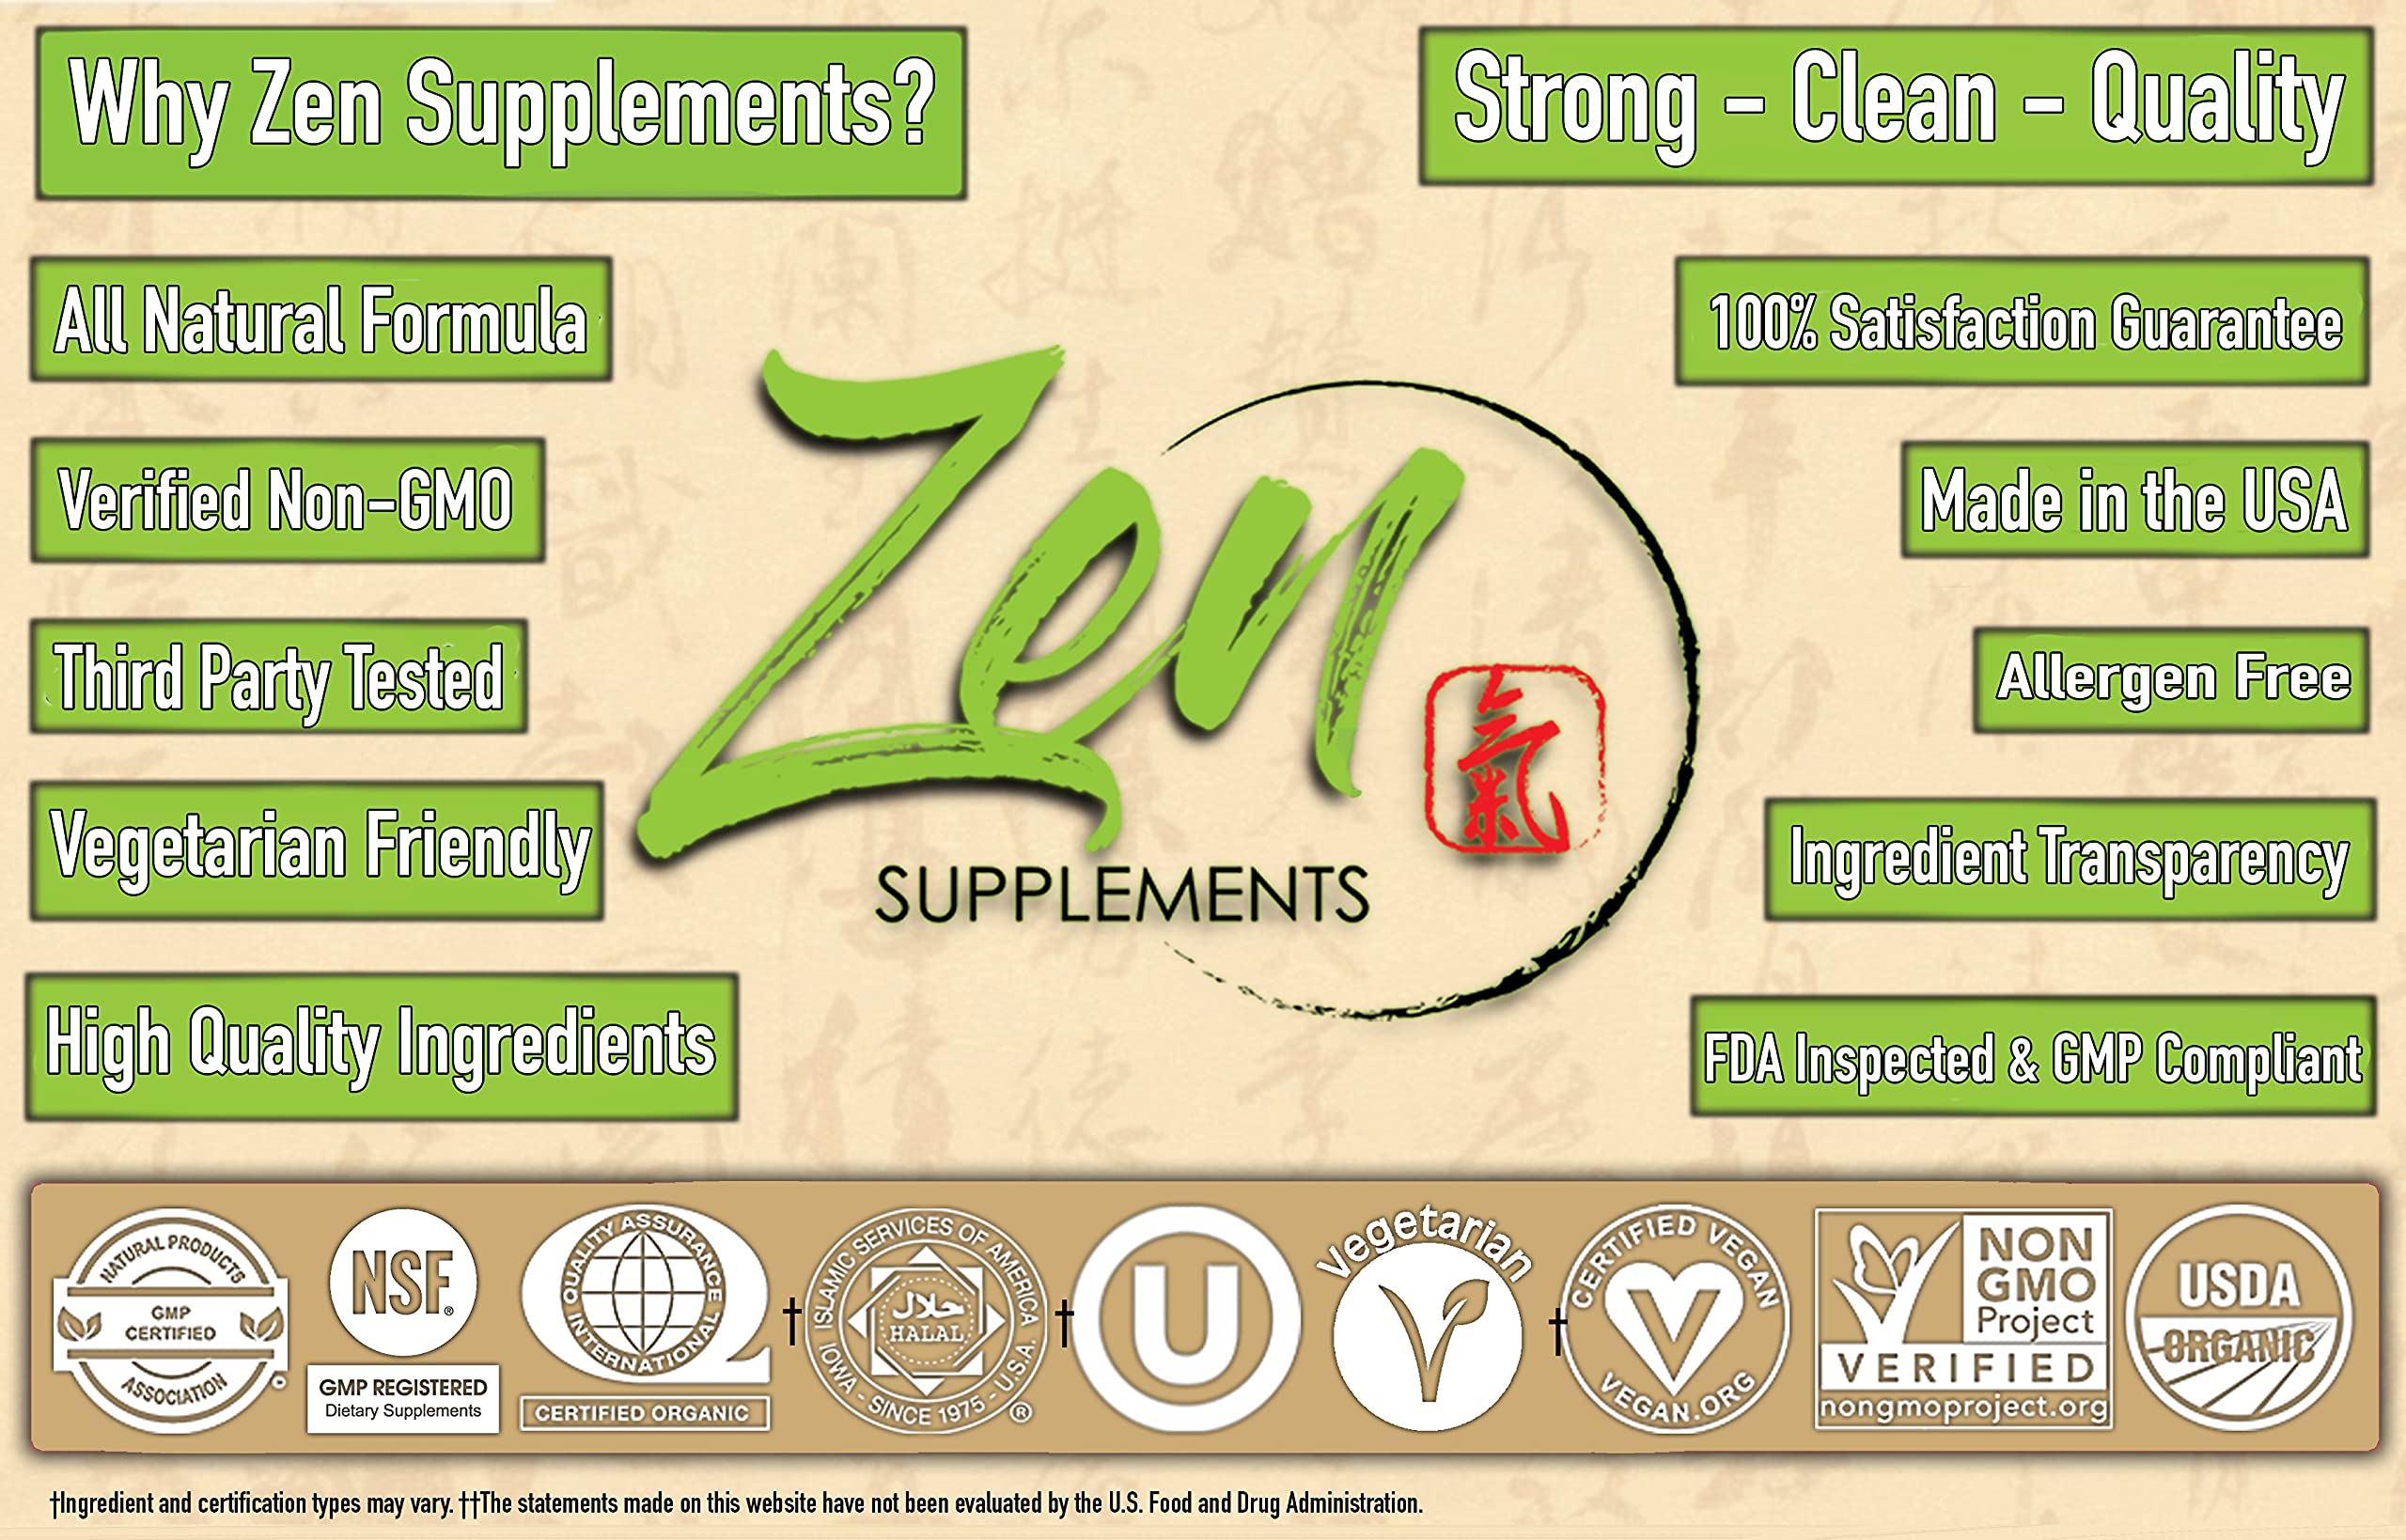 Zen Supplements - Bone Support with Vitamin K-2, D-3 and Boron 120-Tabs - Supports Complete Bone Health & Bone Density - Micronutrients & Trace Nutrients